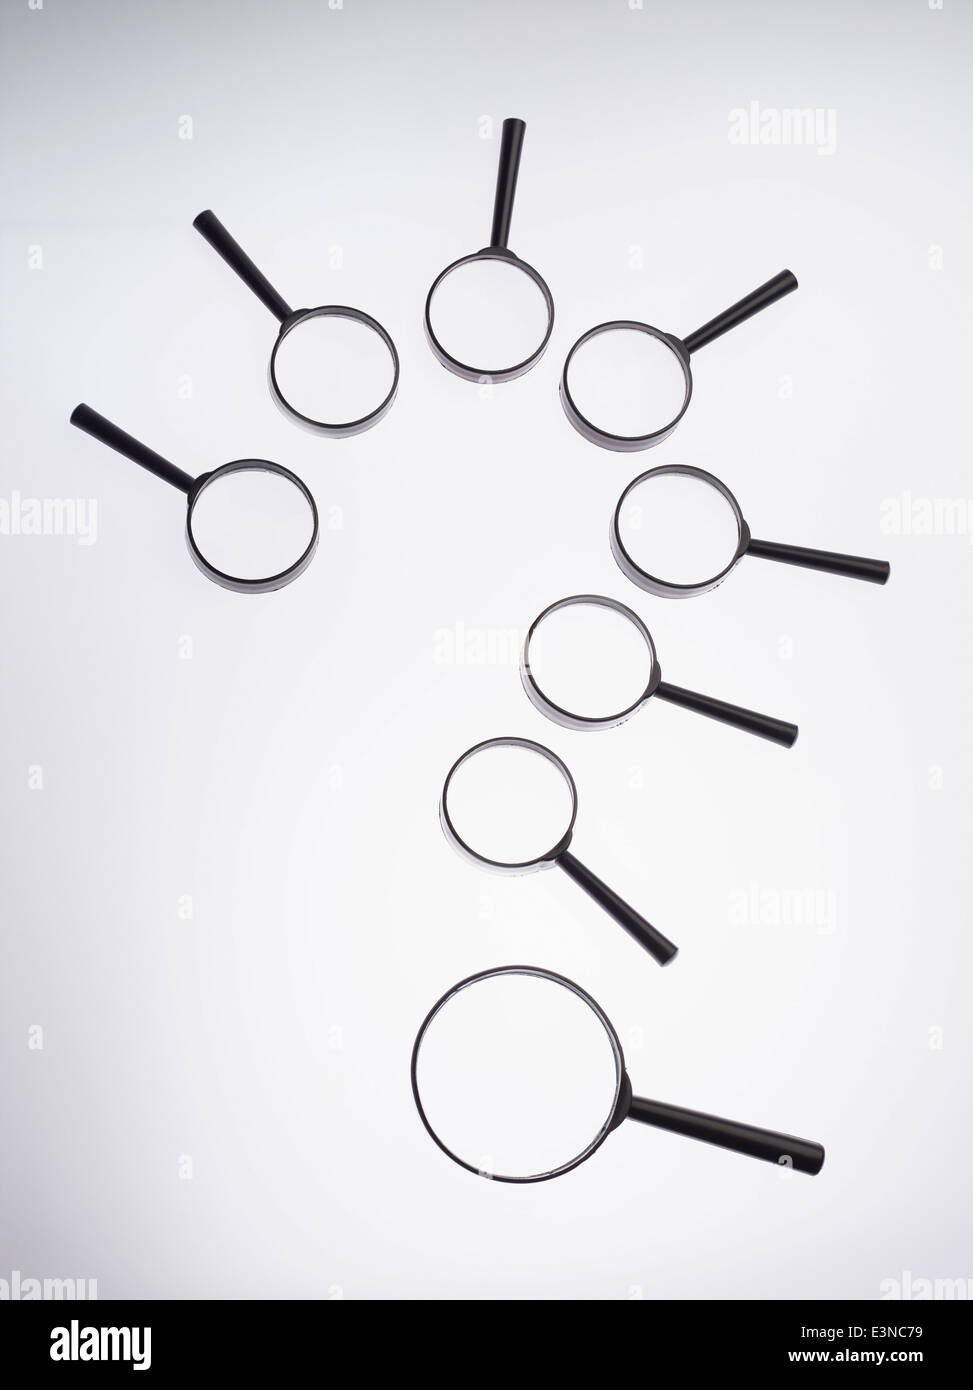 Magnifying glasses over white background Stock Photo